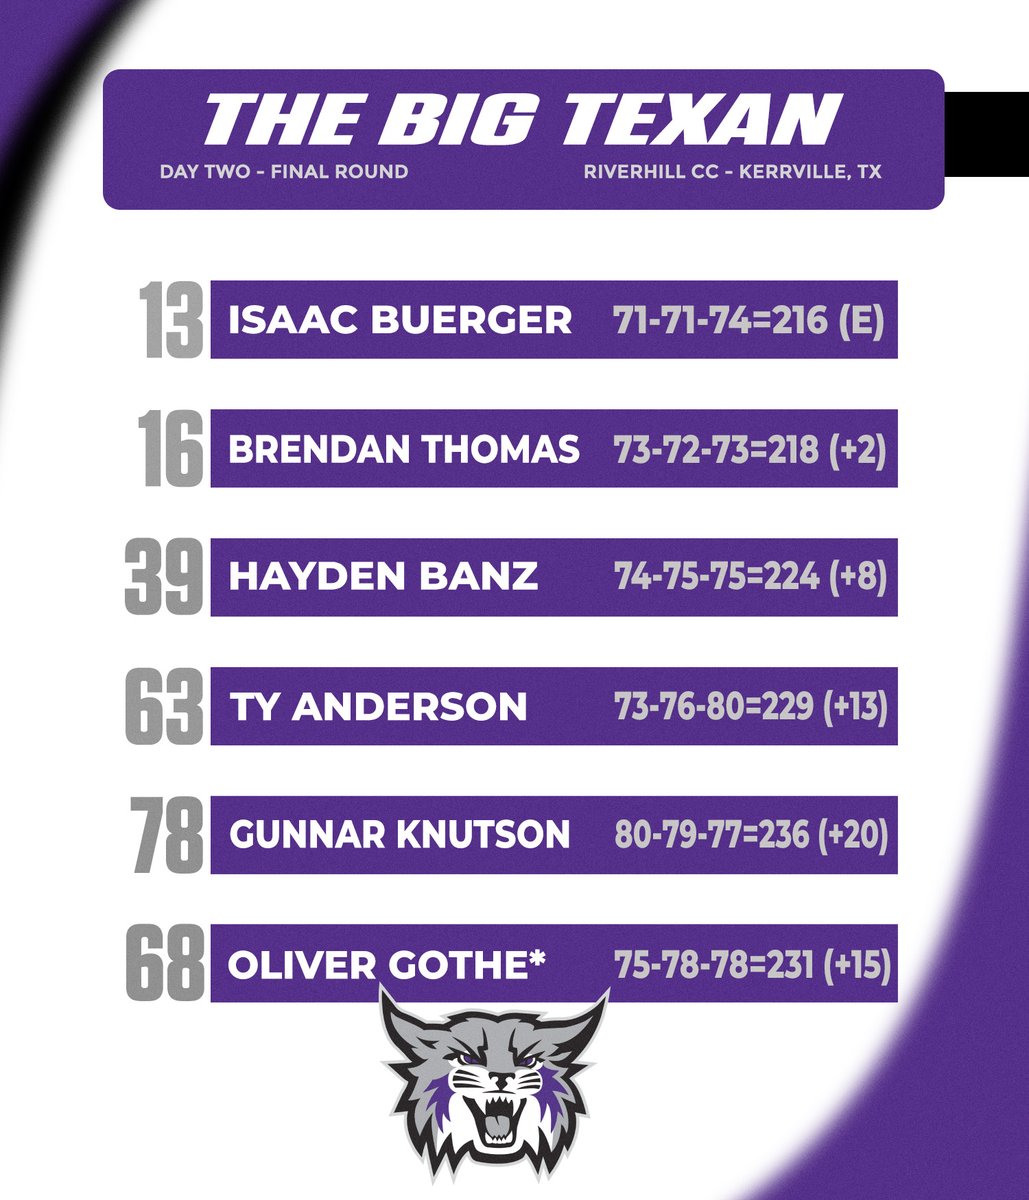 The Wildcats wrap up The Big Texan in a tie for 8th place with a 20-over par 54-hole total of 884. Isaac Buerger (13th) and Brendan Thomas (T16th) each finish inside the top-20. bit.ly/3vpLjPF